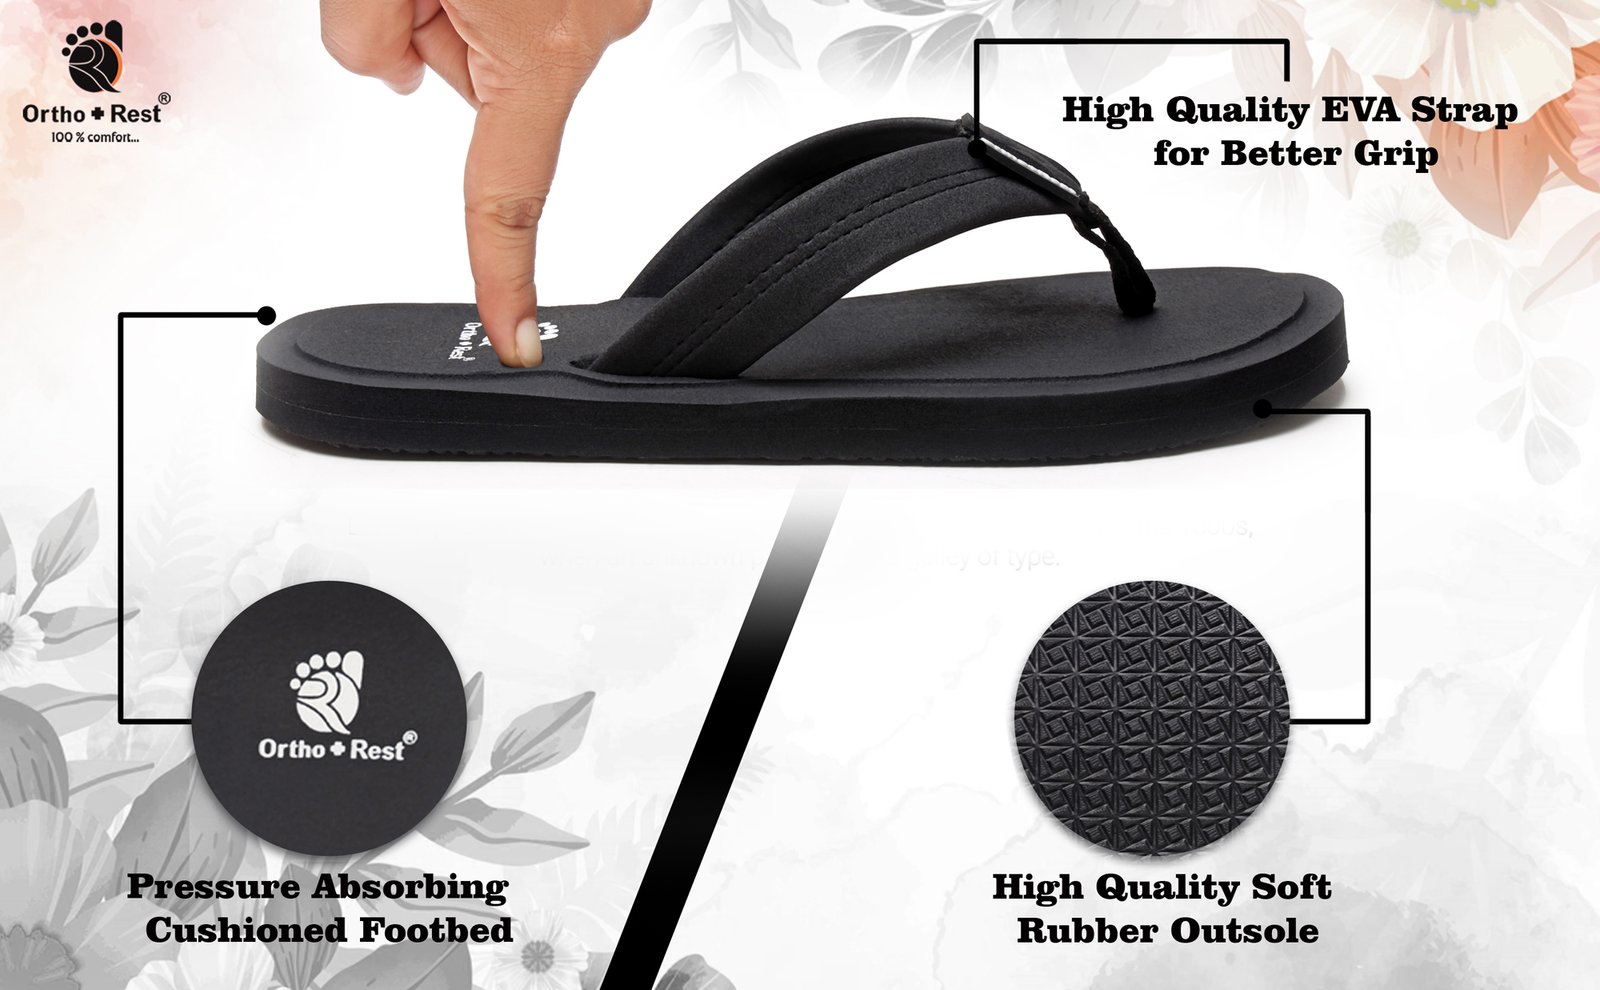 Ortho Slippers With Slip-resistant Rubber